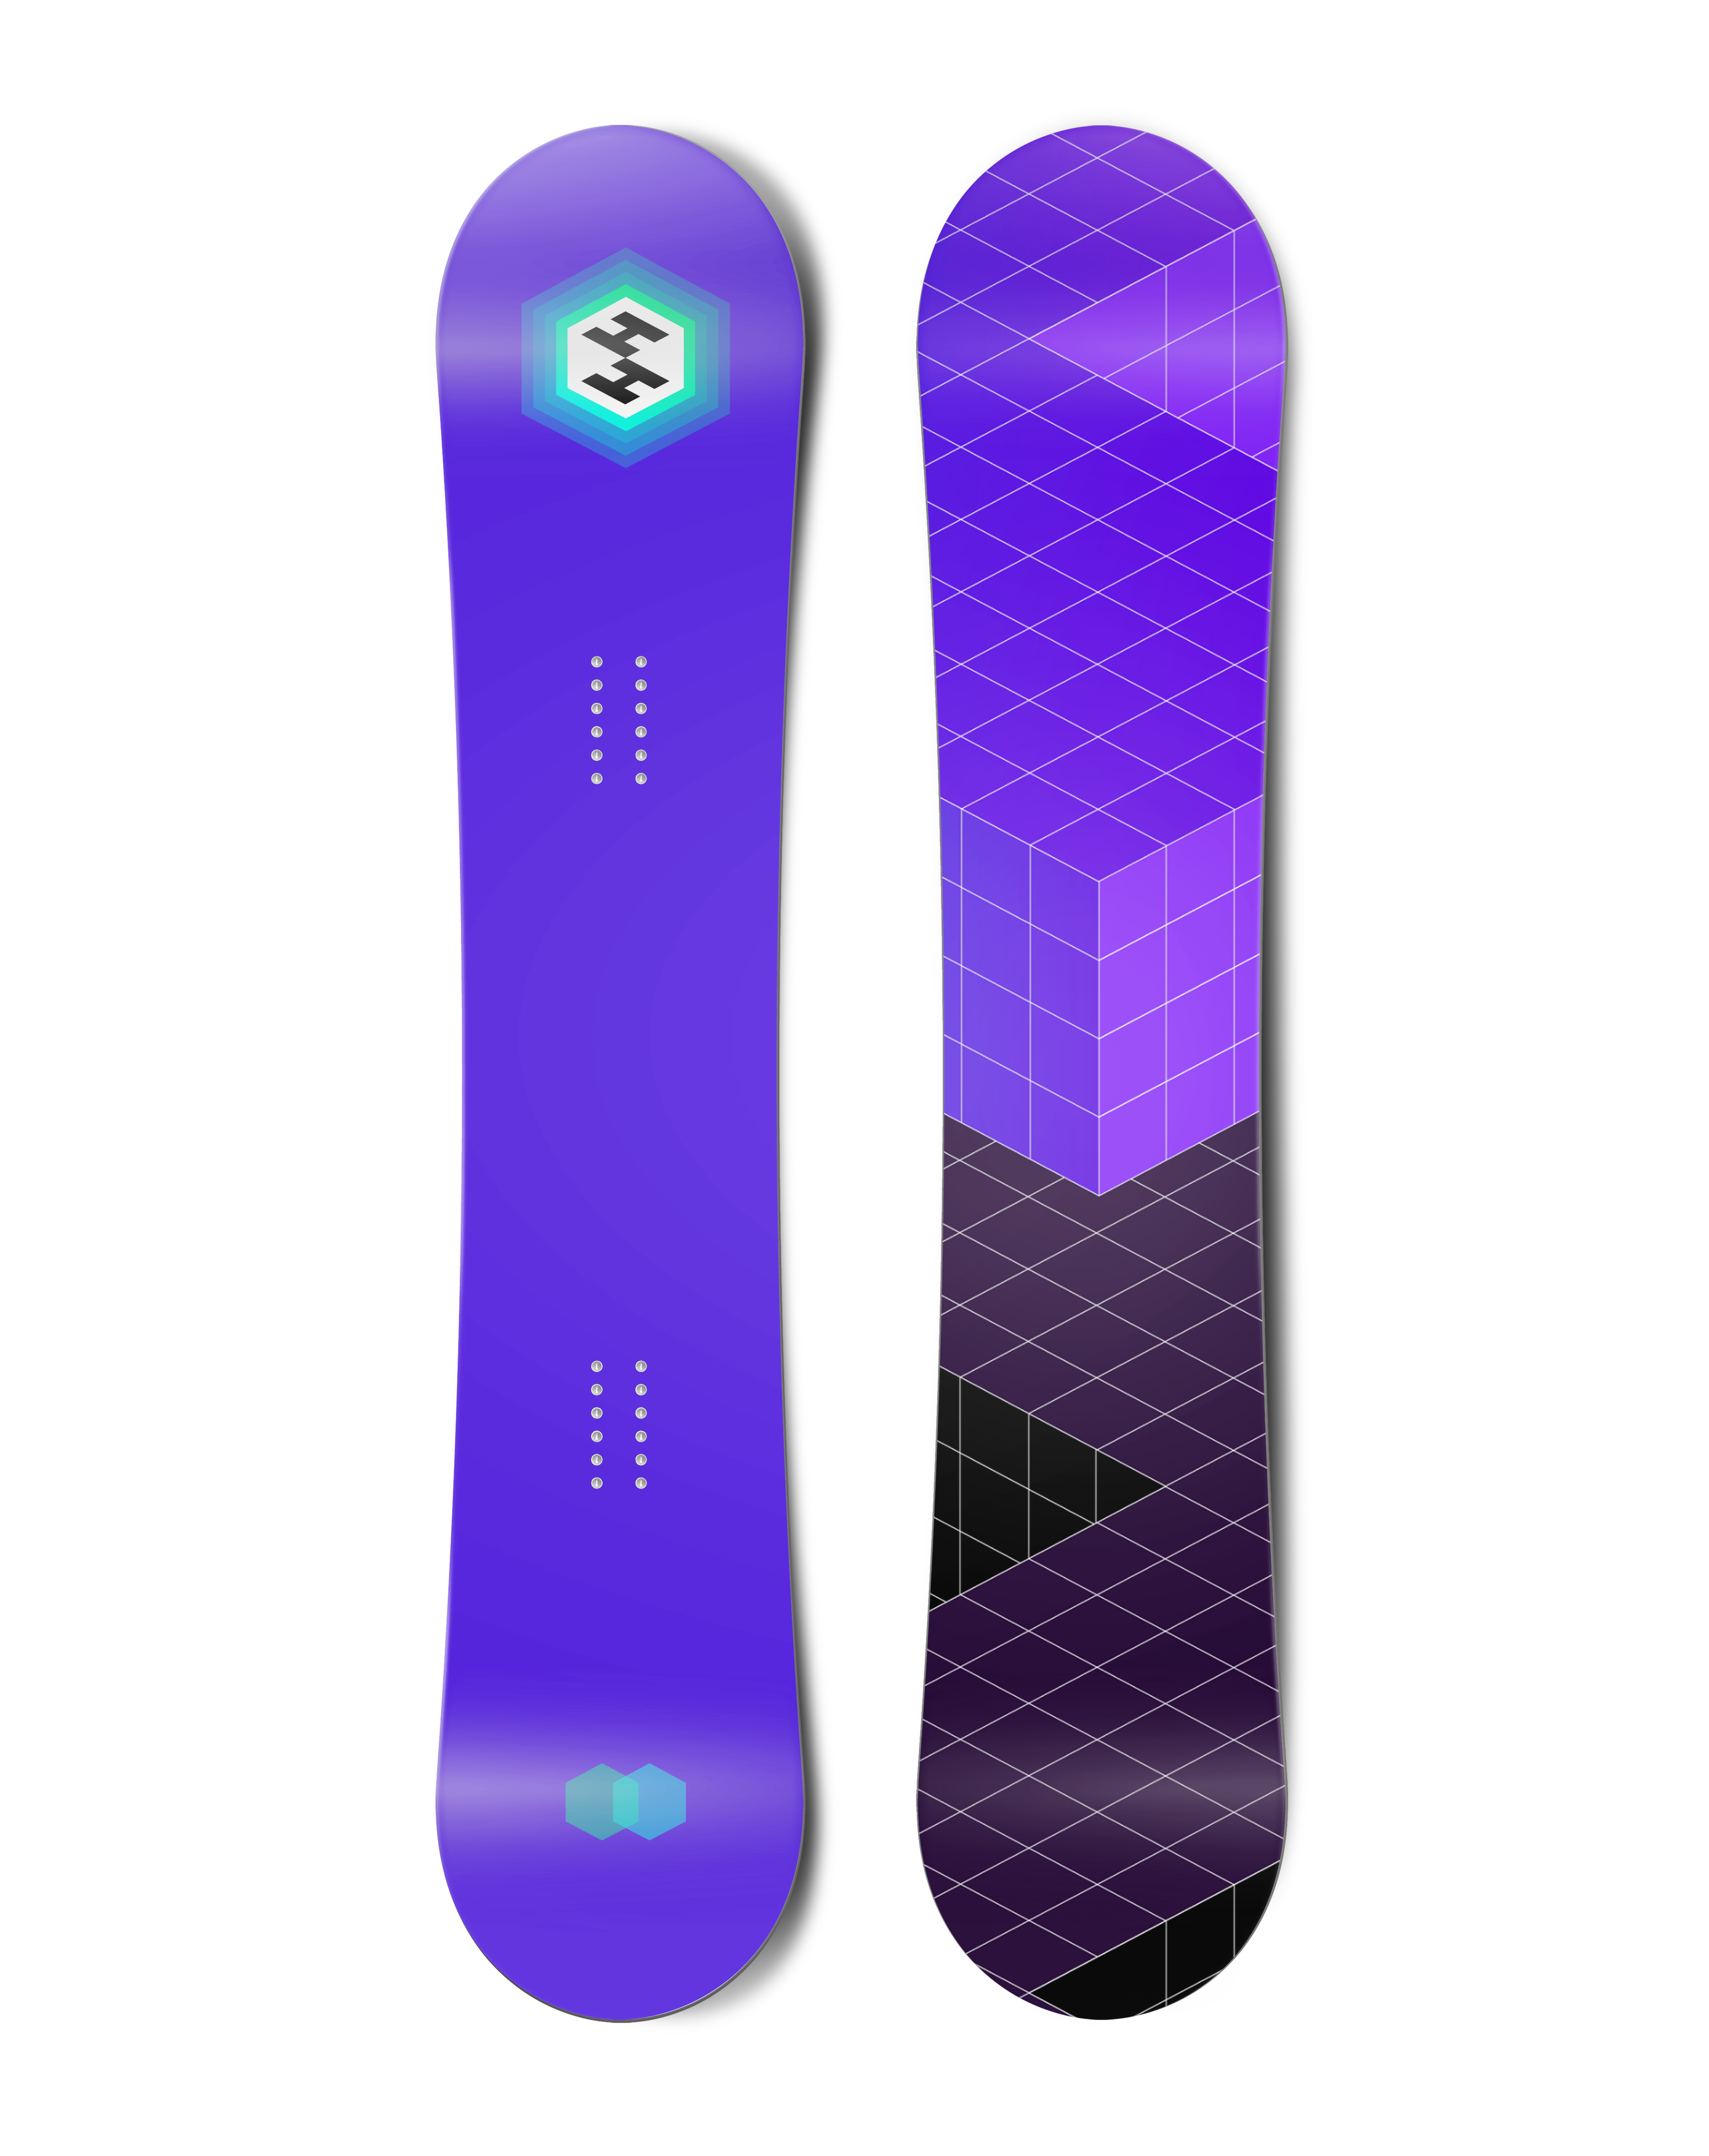 The Inventory Not Tracked Snowboard